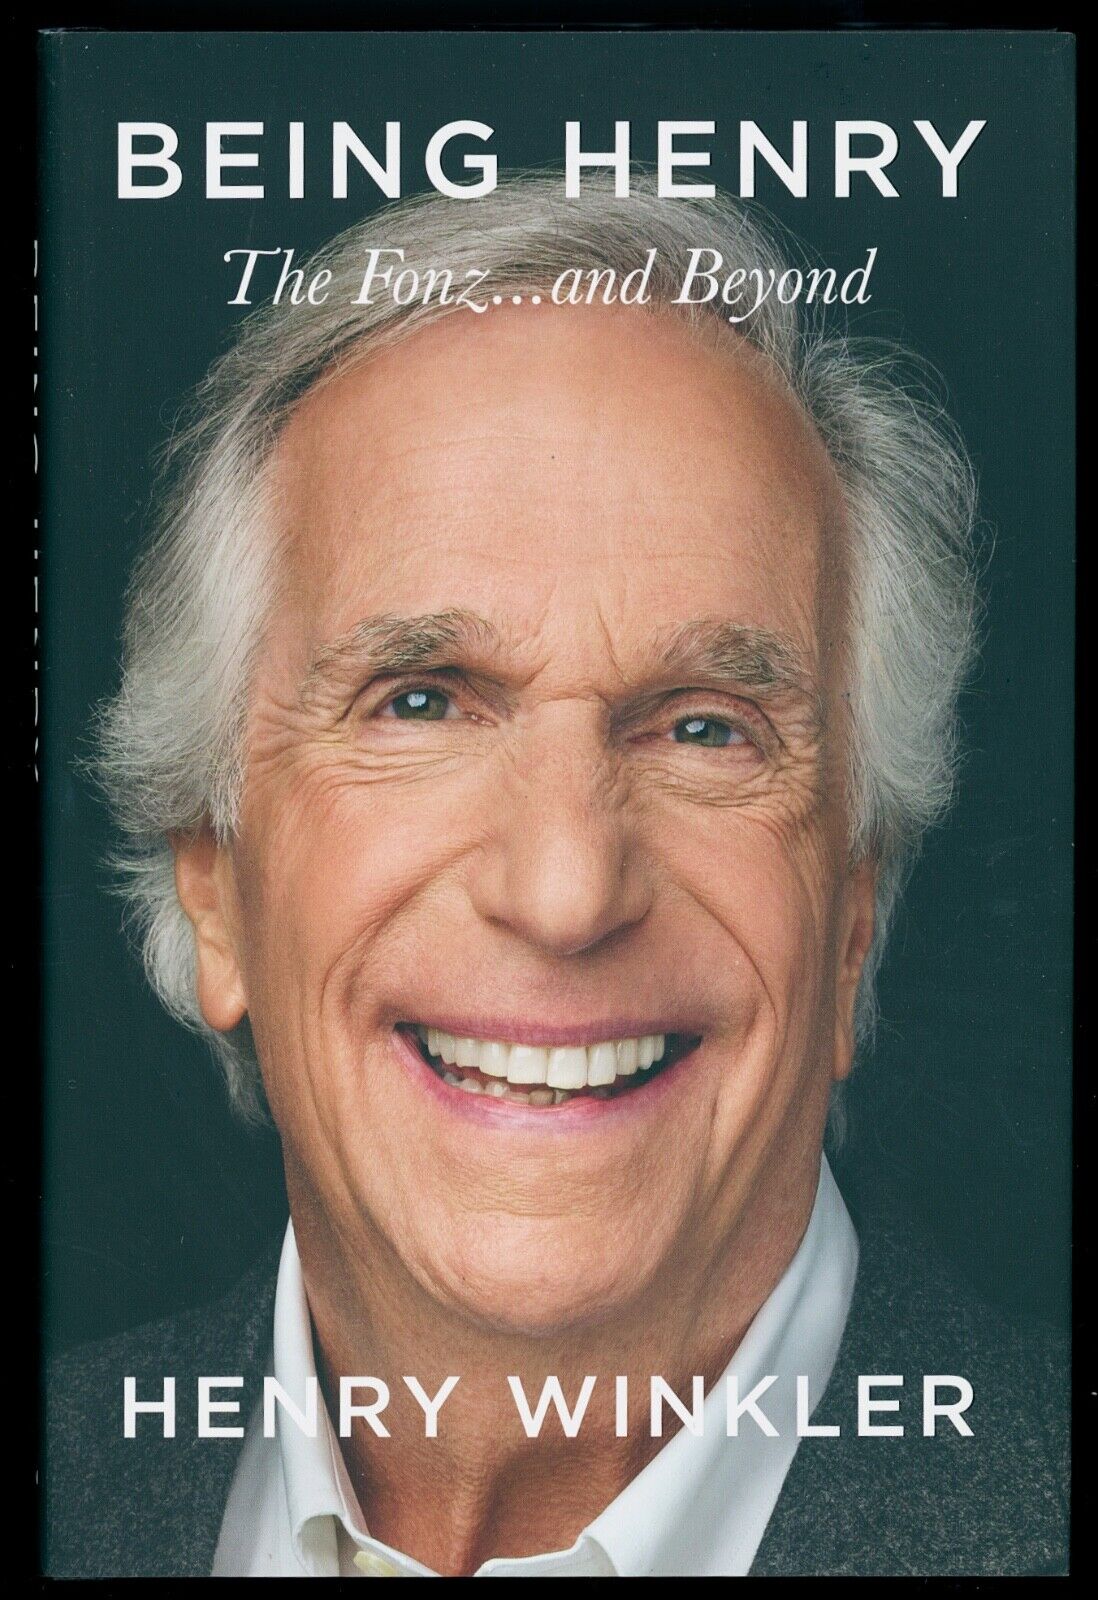 SIGNED Henry Winkler Autographed Book - Being Henry: The Fonz...and Beyond